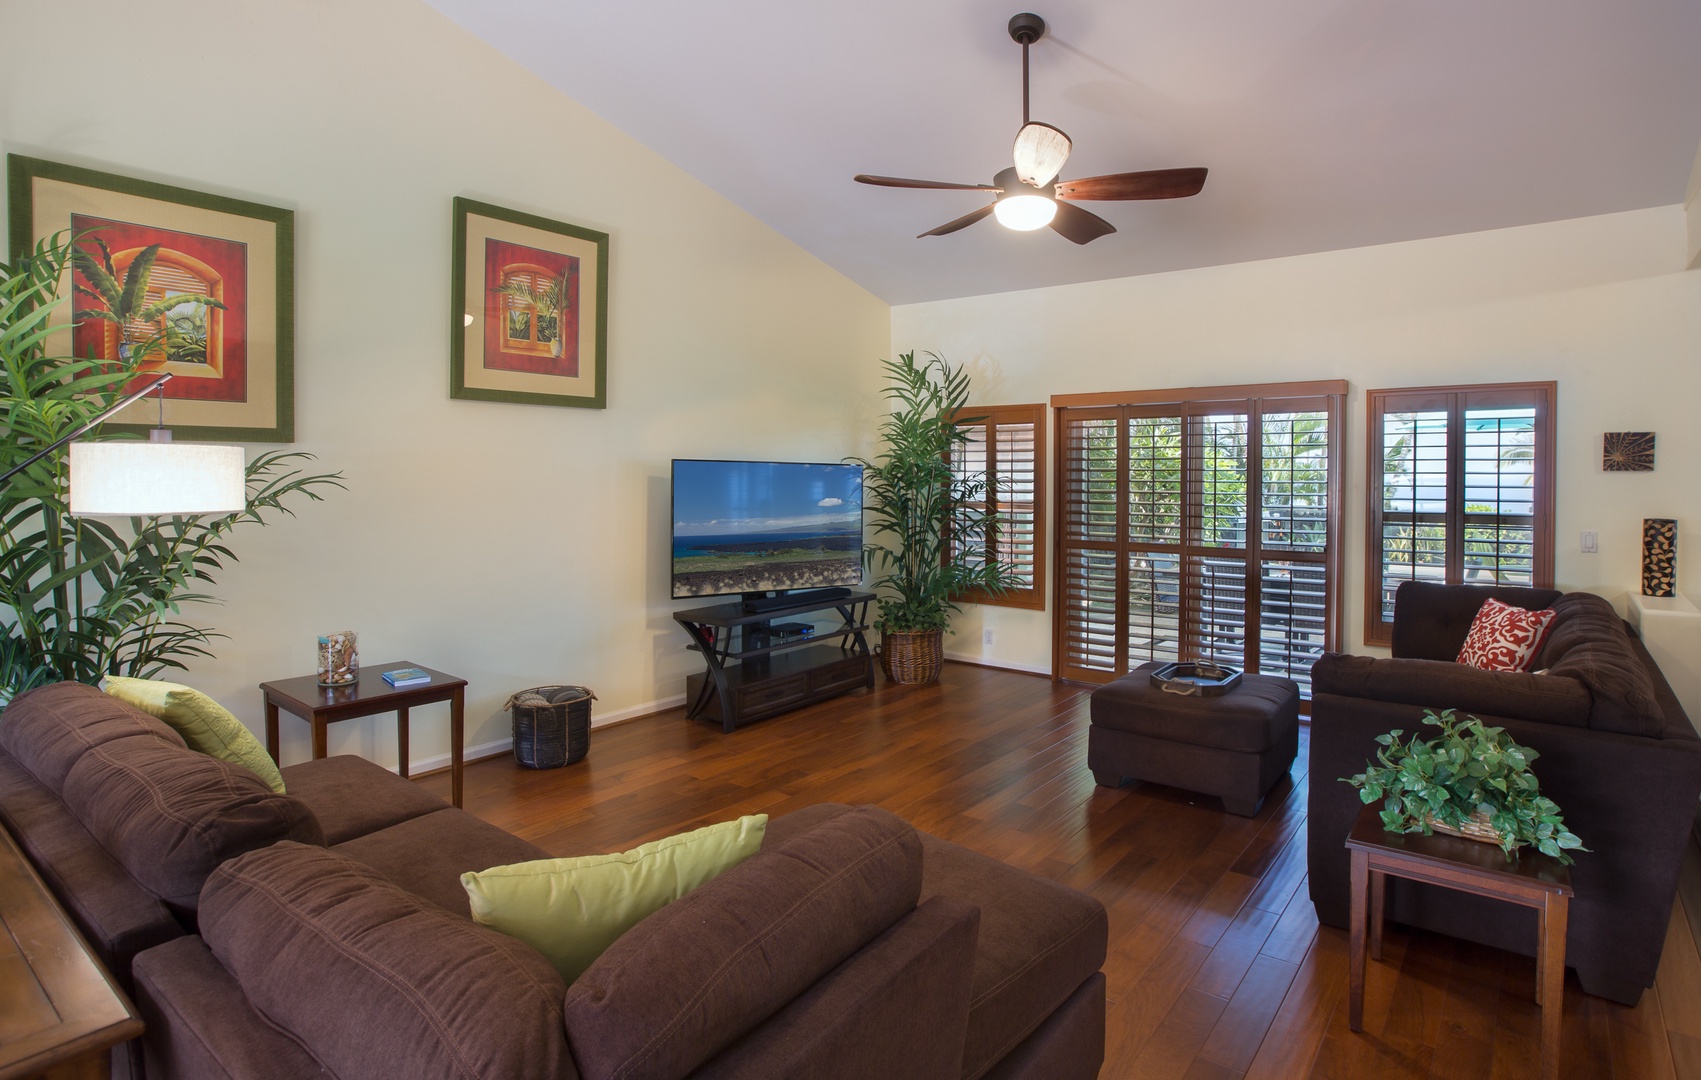 Kailua Kona Vacation Rentals, 7 C's Kona (Big Island) - Spacious open floor plan, perfect for families to gather and visit.